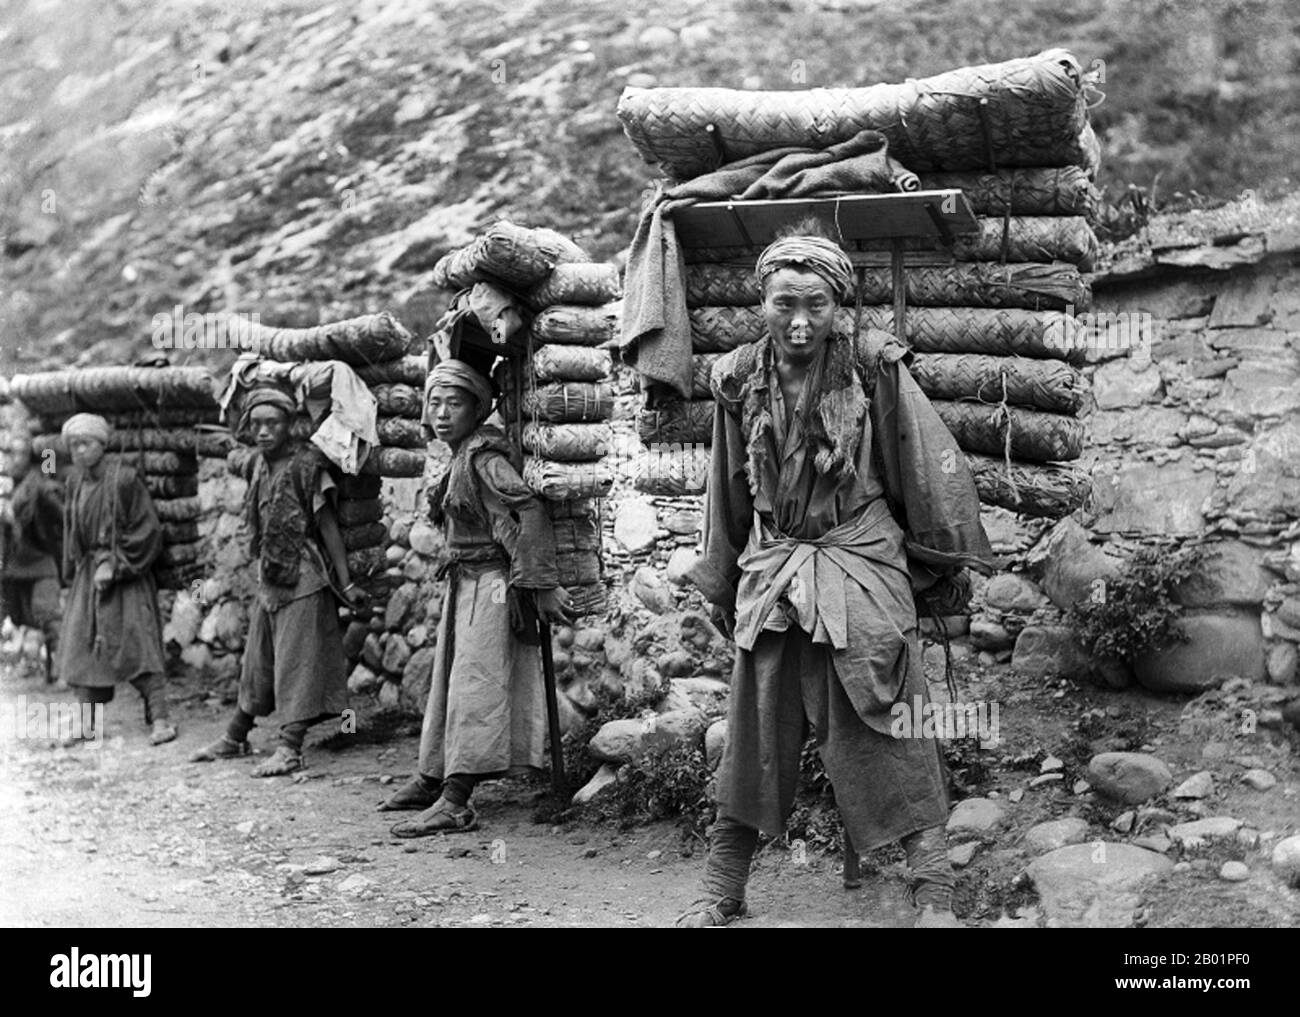 China: Tea Porters on Tea Horse Road, Western Sichuan, early 1900s.  The Tea Horse Road (Cha Ma Dao) was a network of mule caravan paths winding through the mountains of Yunnan, Sichuan and Tibet in Southwest China. It is also sometimes referred to as the Southern Silk Road and Ancient Tea and Horse Road.  From around a thousand years ago, the Ancient Tea Route was a trade link from Yunnan, one of the first tea-producing regions, to India via Burma, to Tibet and to central China via Sichuan Province. In addition to tea, the mule caravans carried salt. Stock Photo